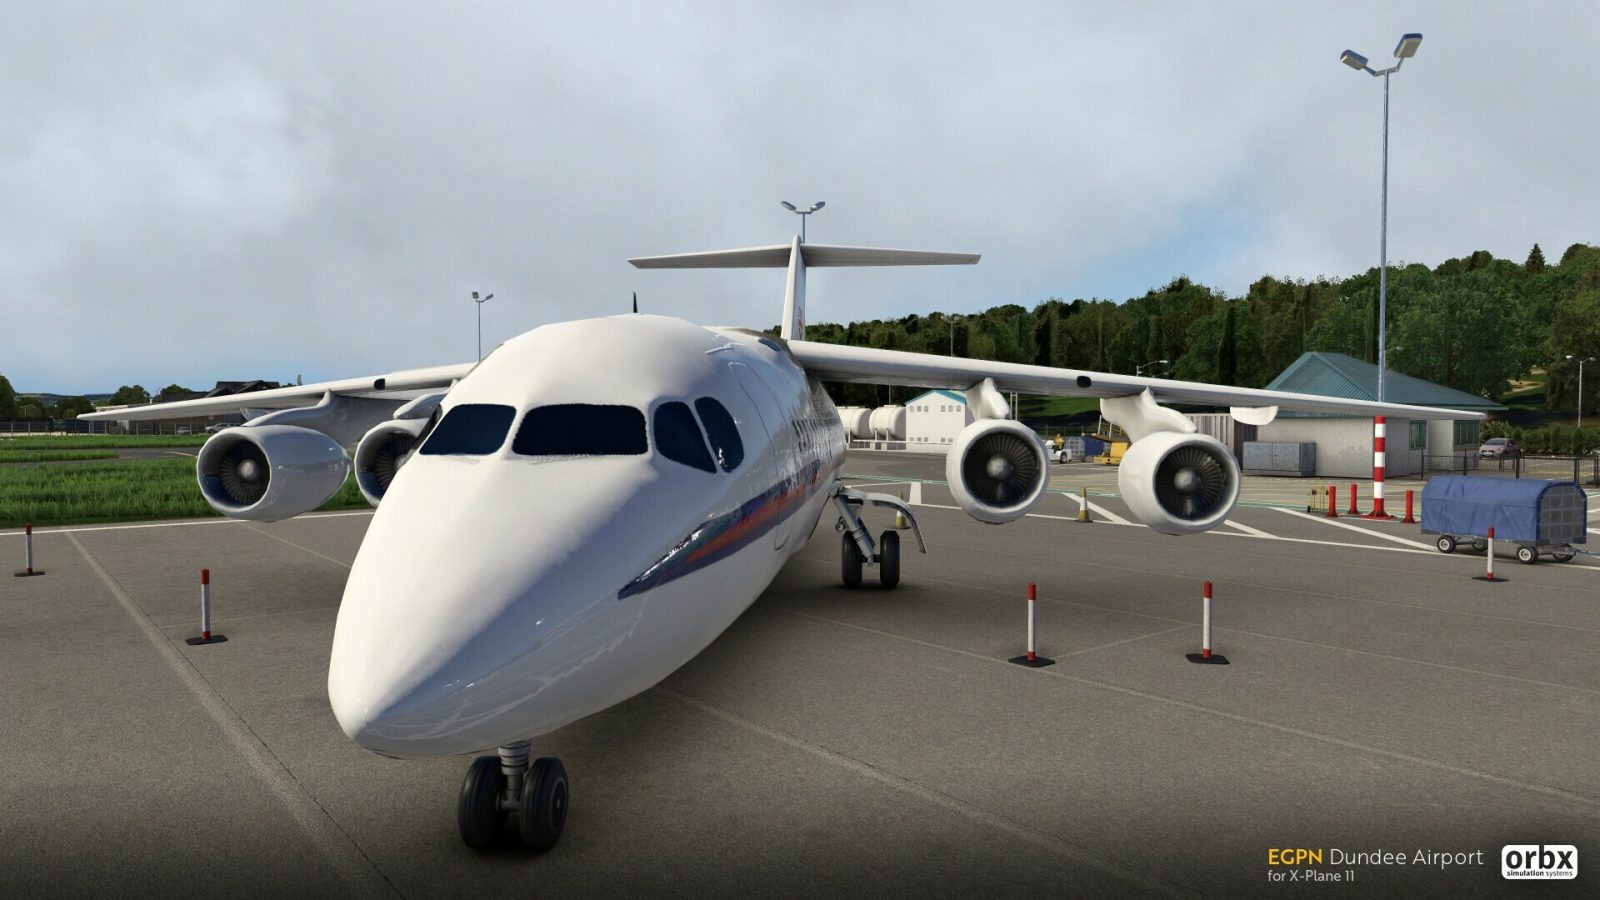 Orbx Dundee Airport-1807 